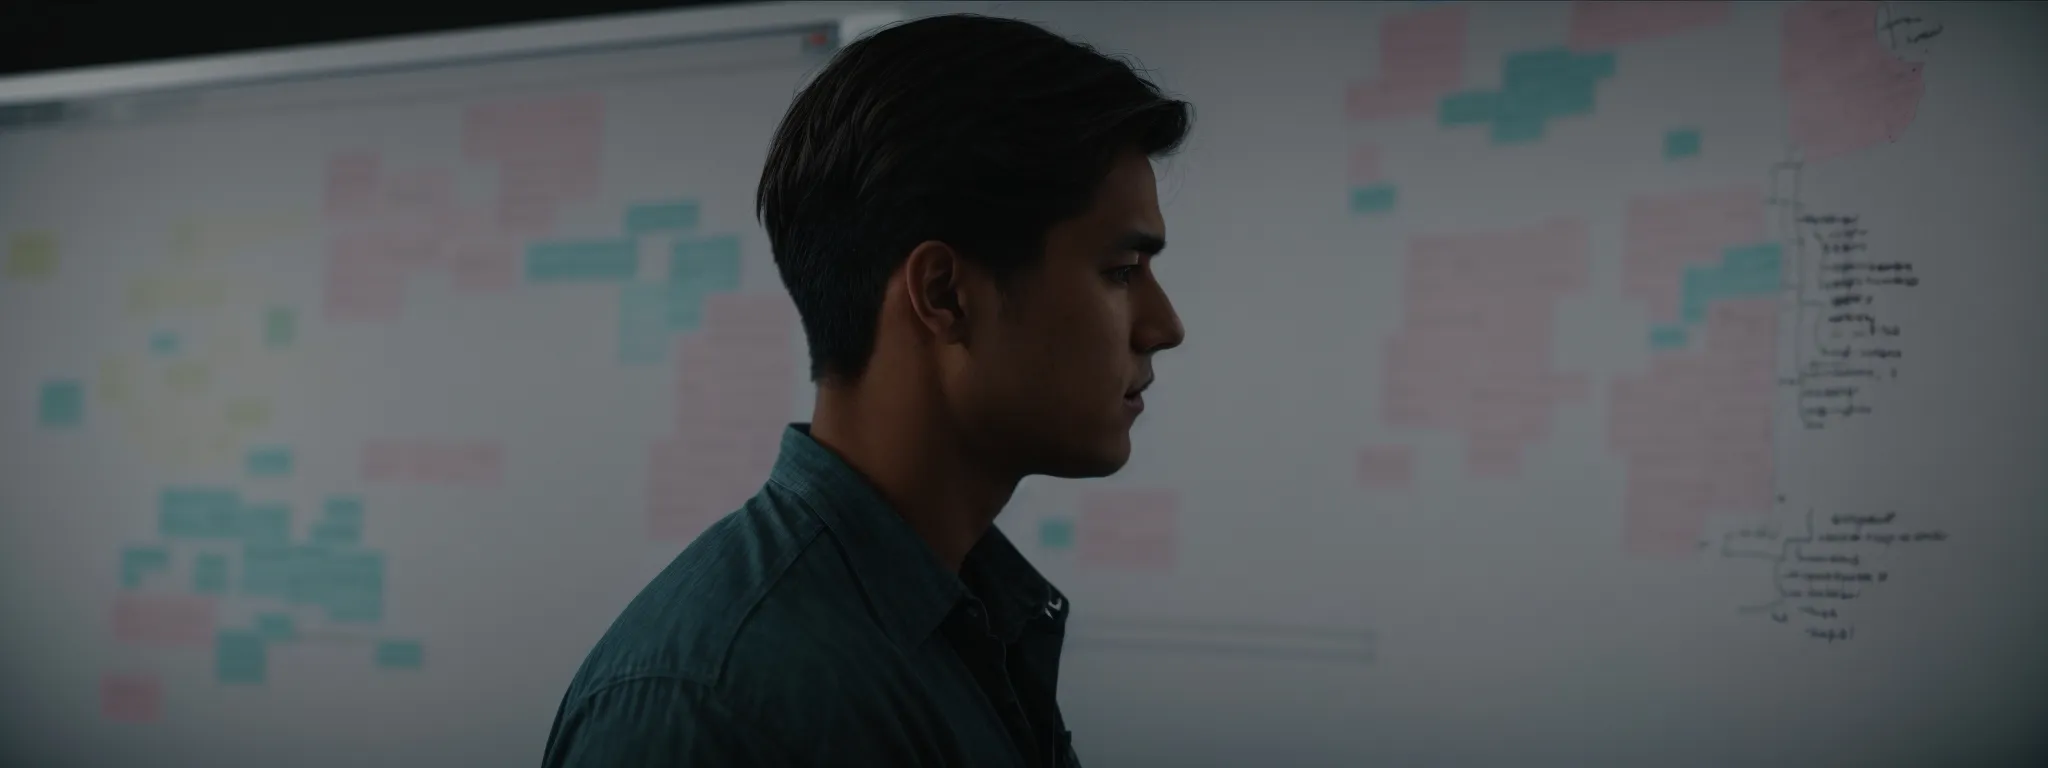 a web developer gazes intently at a large, visible sitemap laid out on a whiteboard, connecting various sections with marker lines.